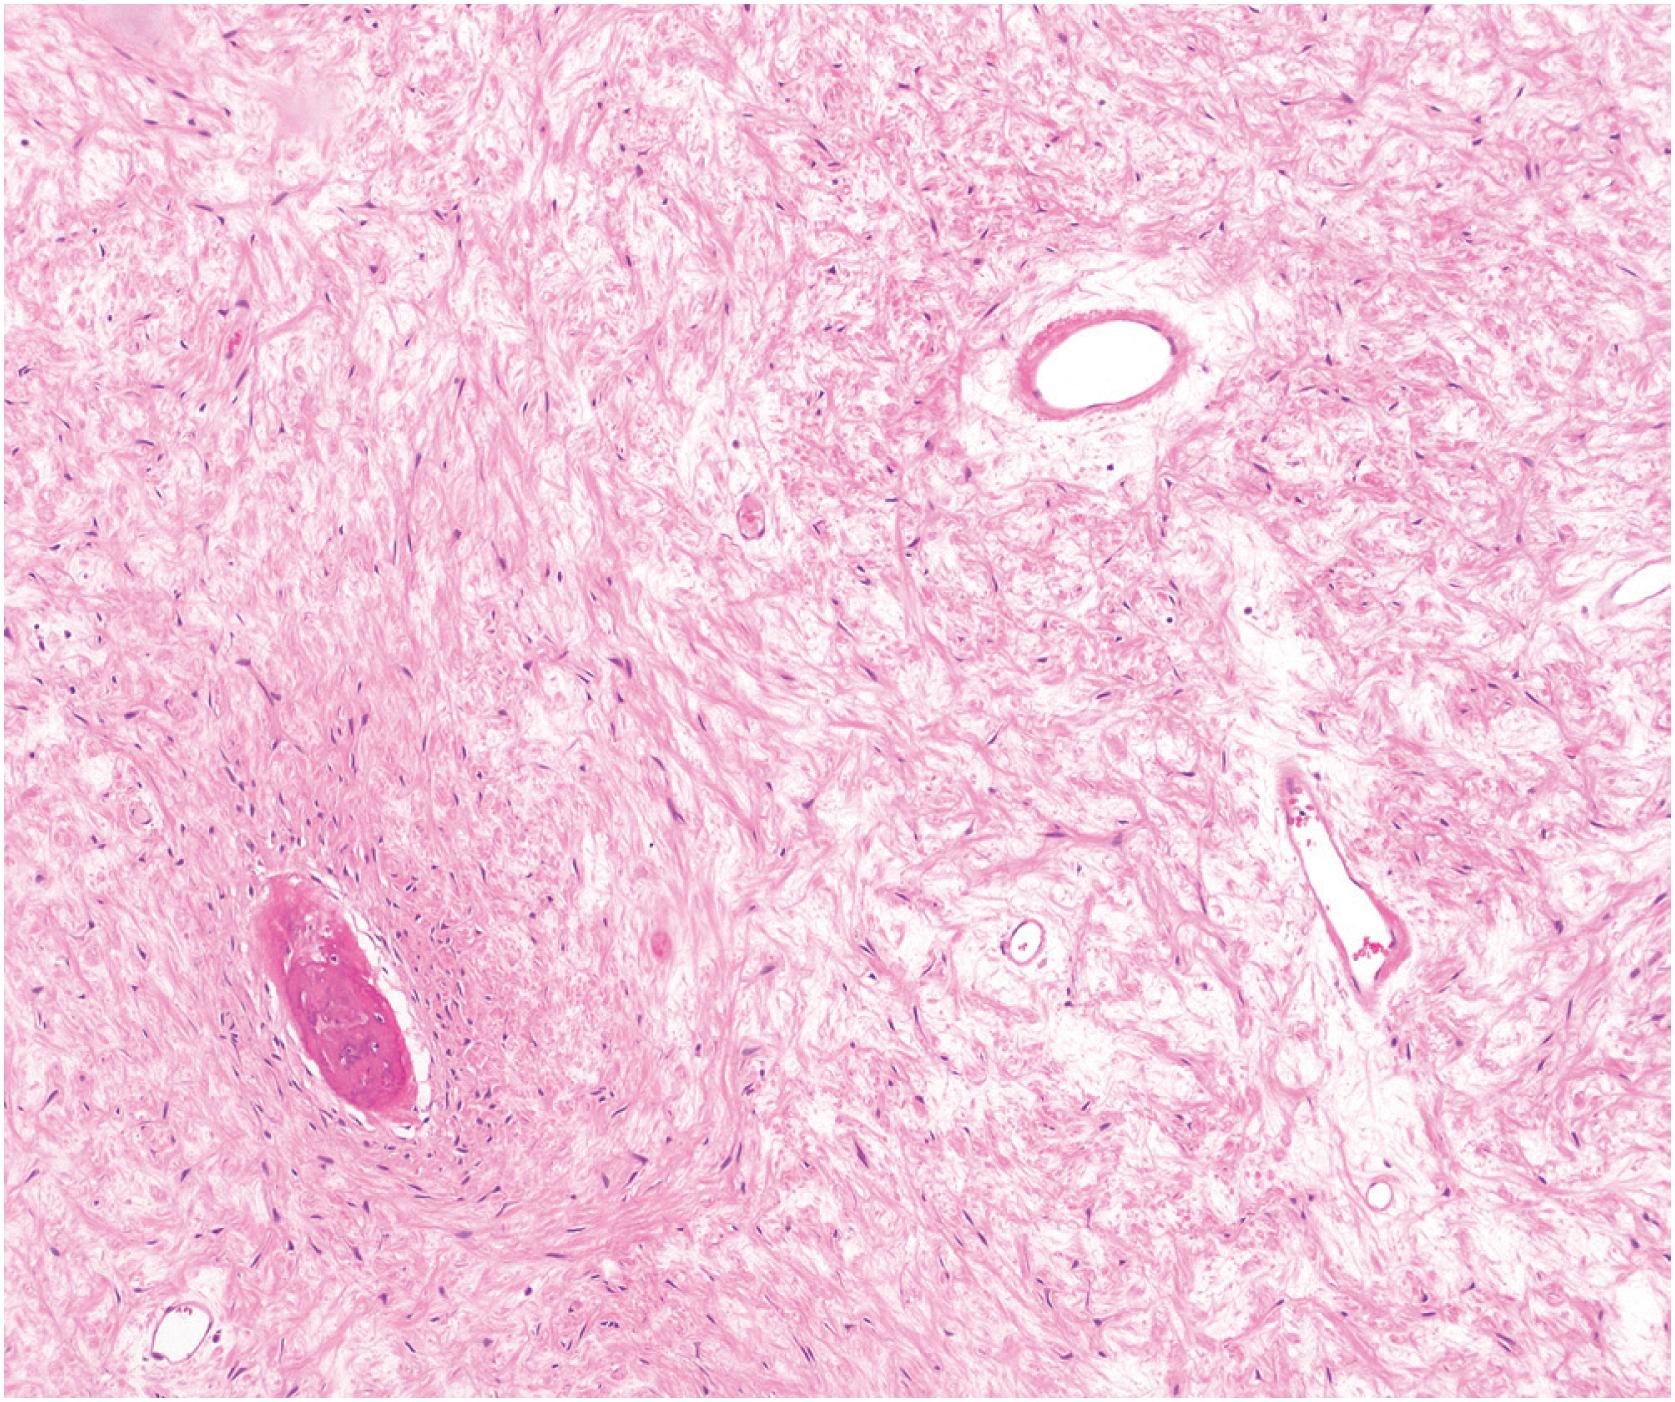 Fig. 24.6, The stroma of fibrous dysplasia ranges from the typical hypercellular to hypocellular and “bubbly” myxoid stroma. However, significant nuclear atypia is not observed.